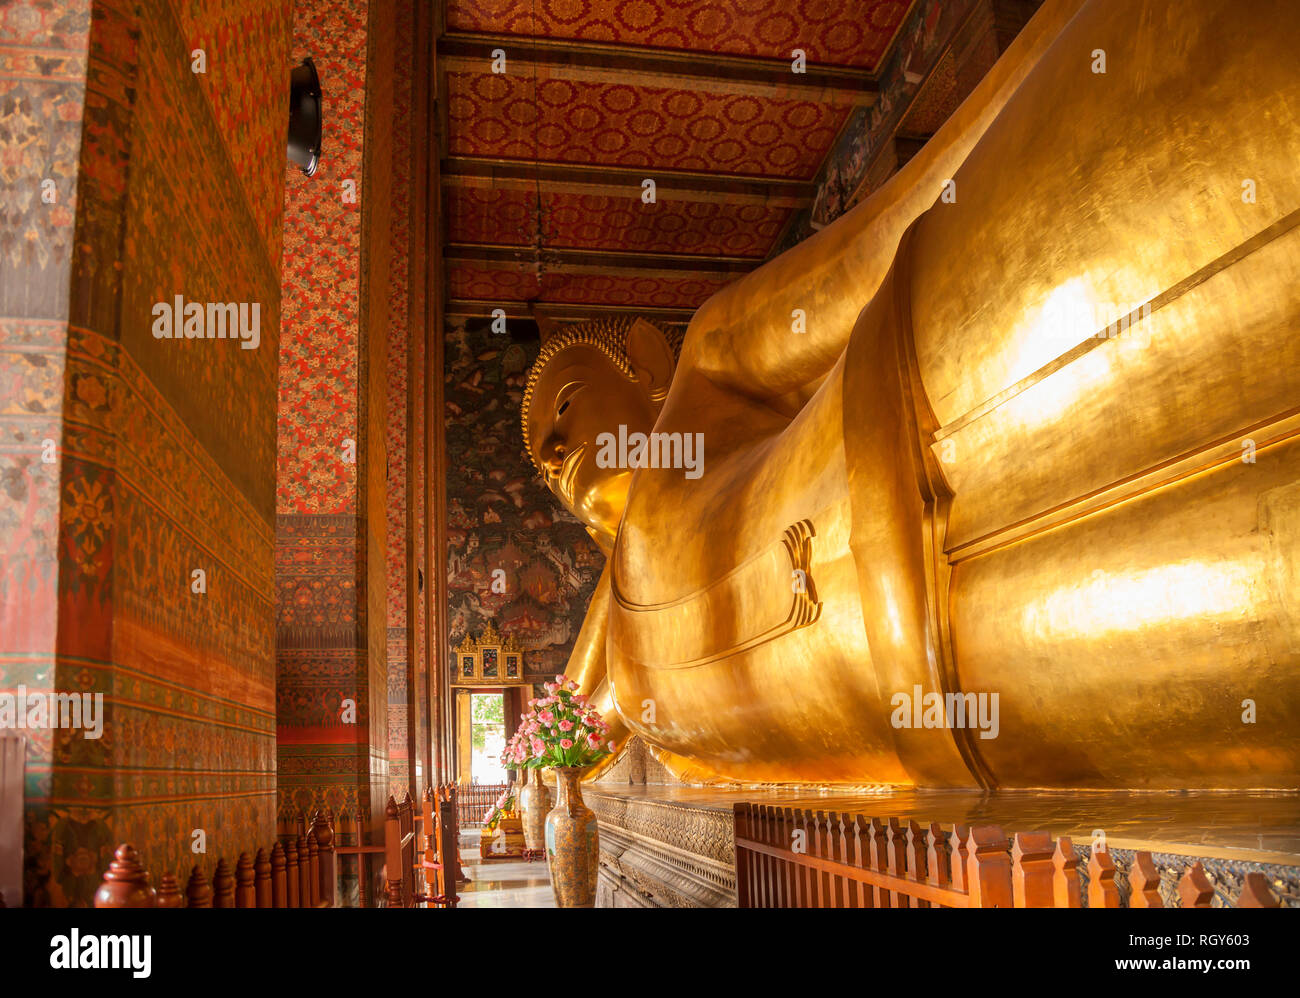 Wat Pho Temple, known also as the Temple of the Reclining Buddha, is a Buddhist temple complex in the Phra Nakhon District, Bangkok, Thailand Stock Photo